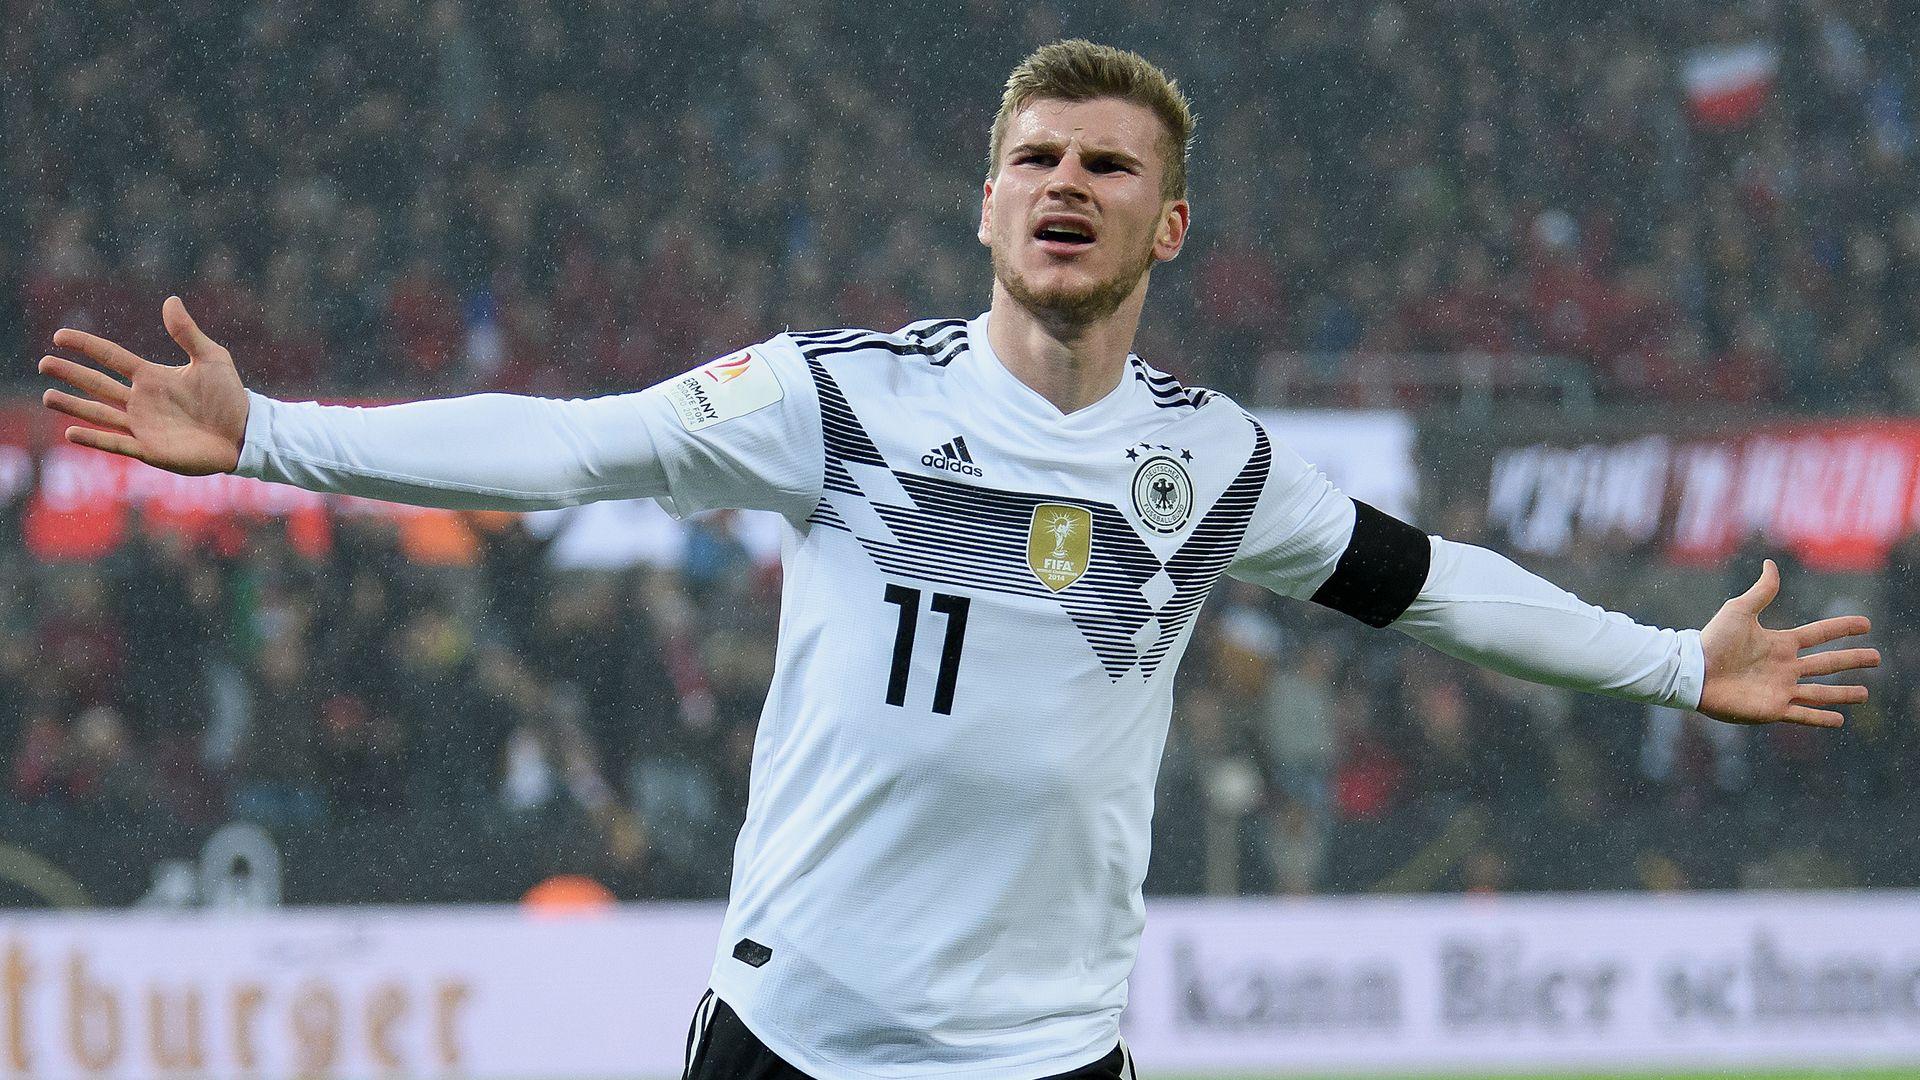 Timo Werner on Germany's FIFA World Cup chances: “We're absolutely